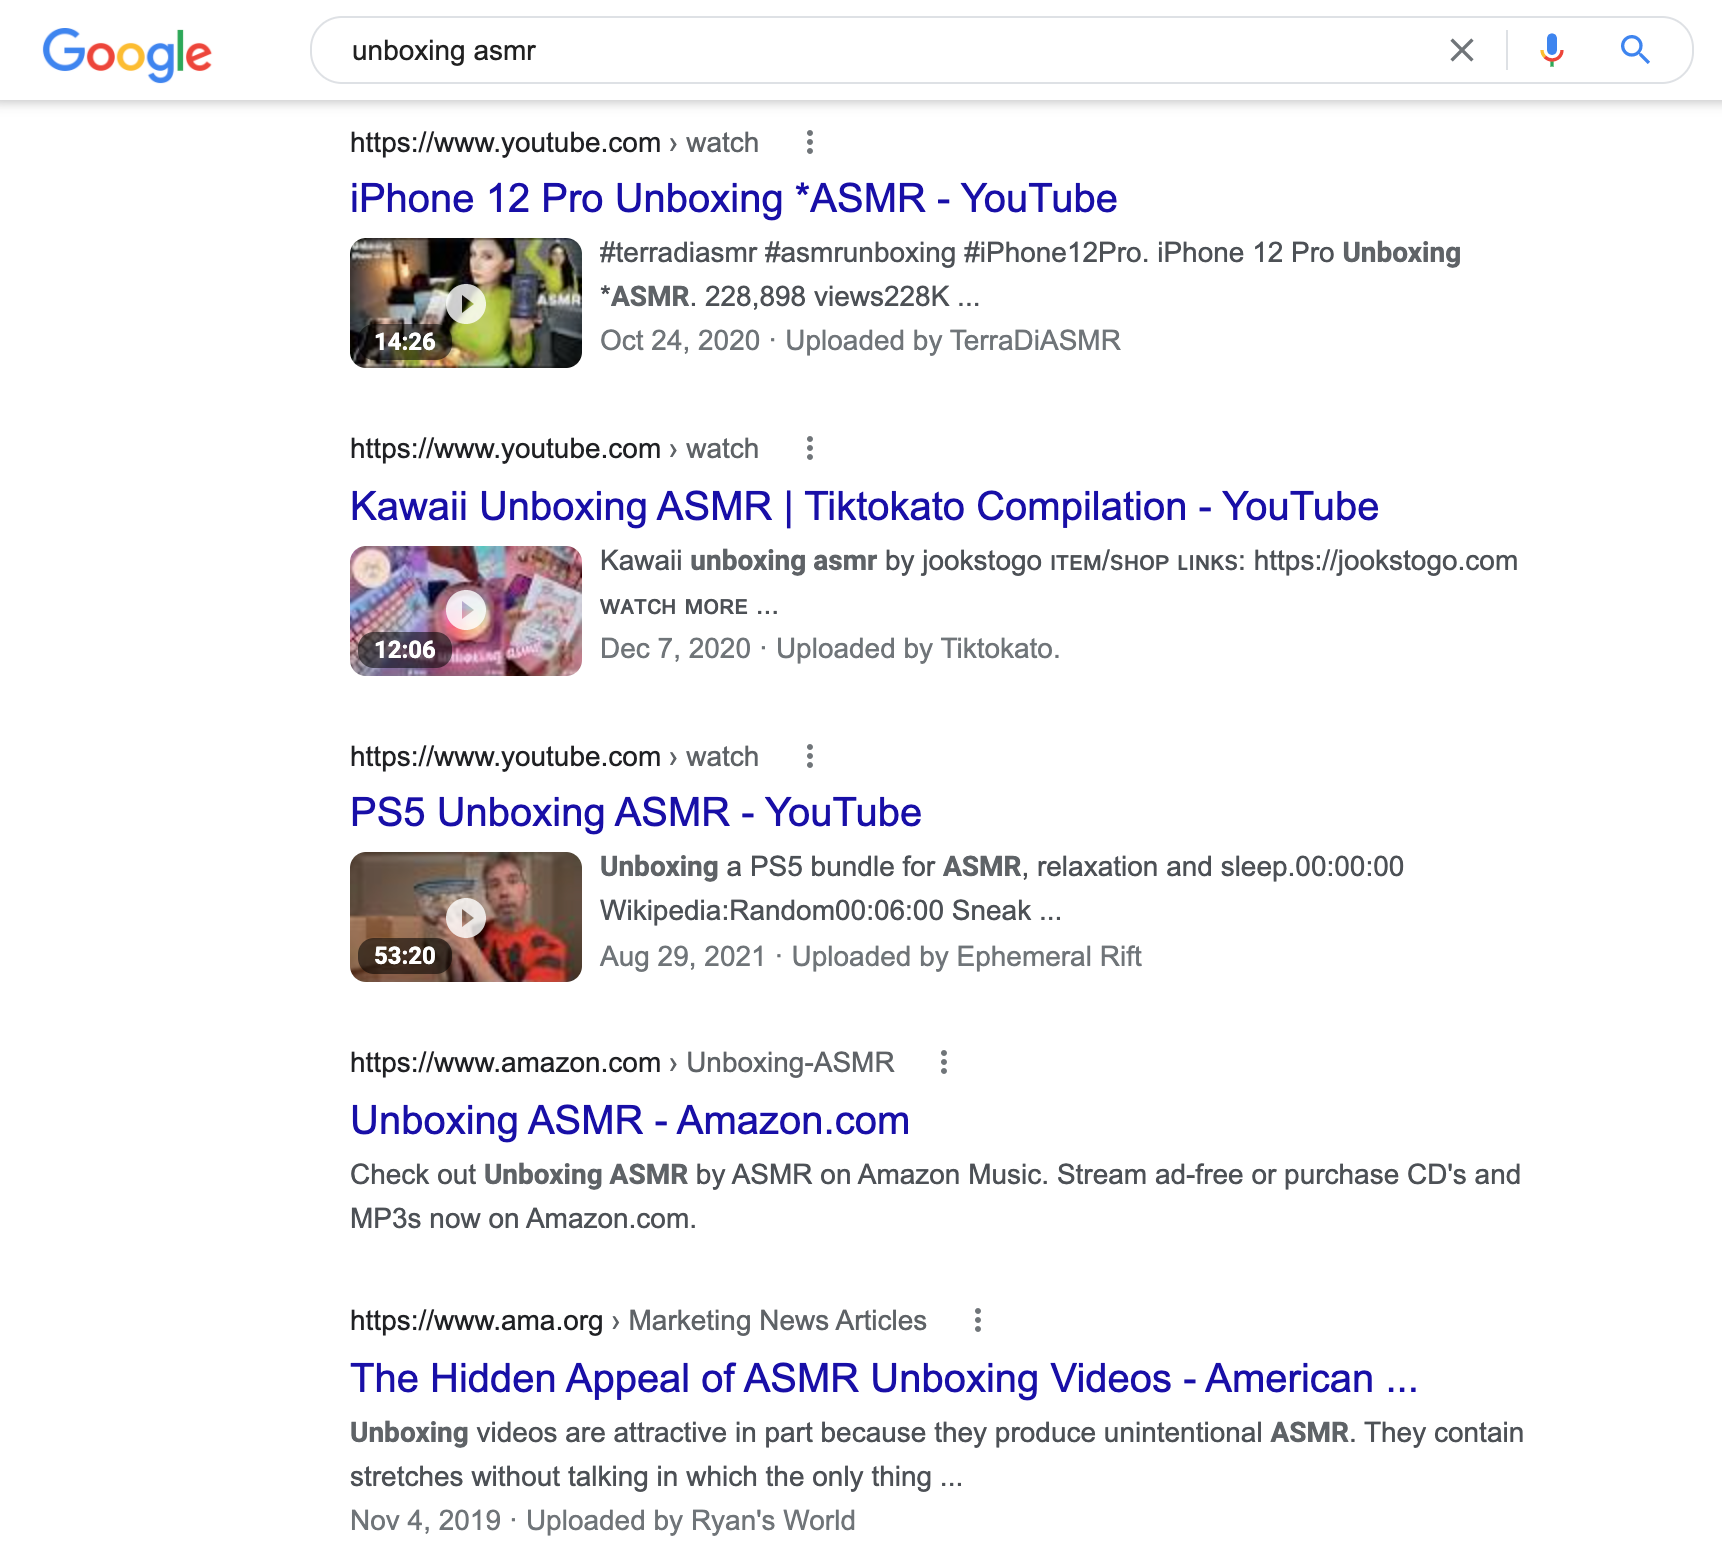 Search results of unboxing ASMR.